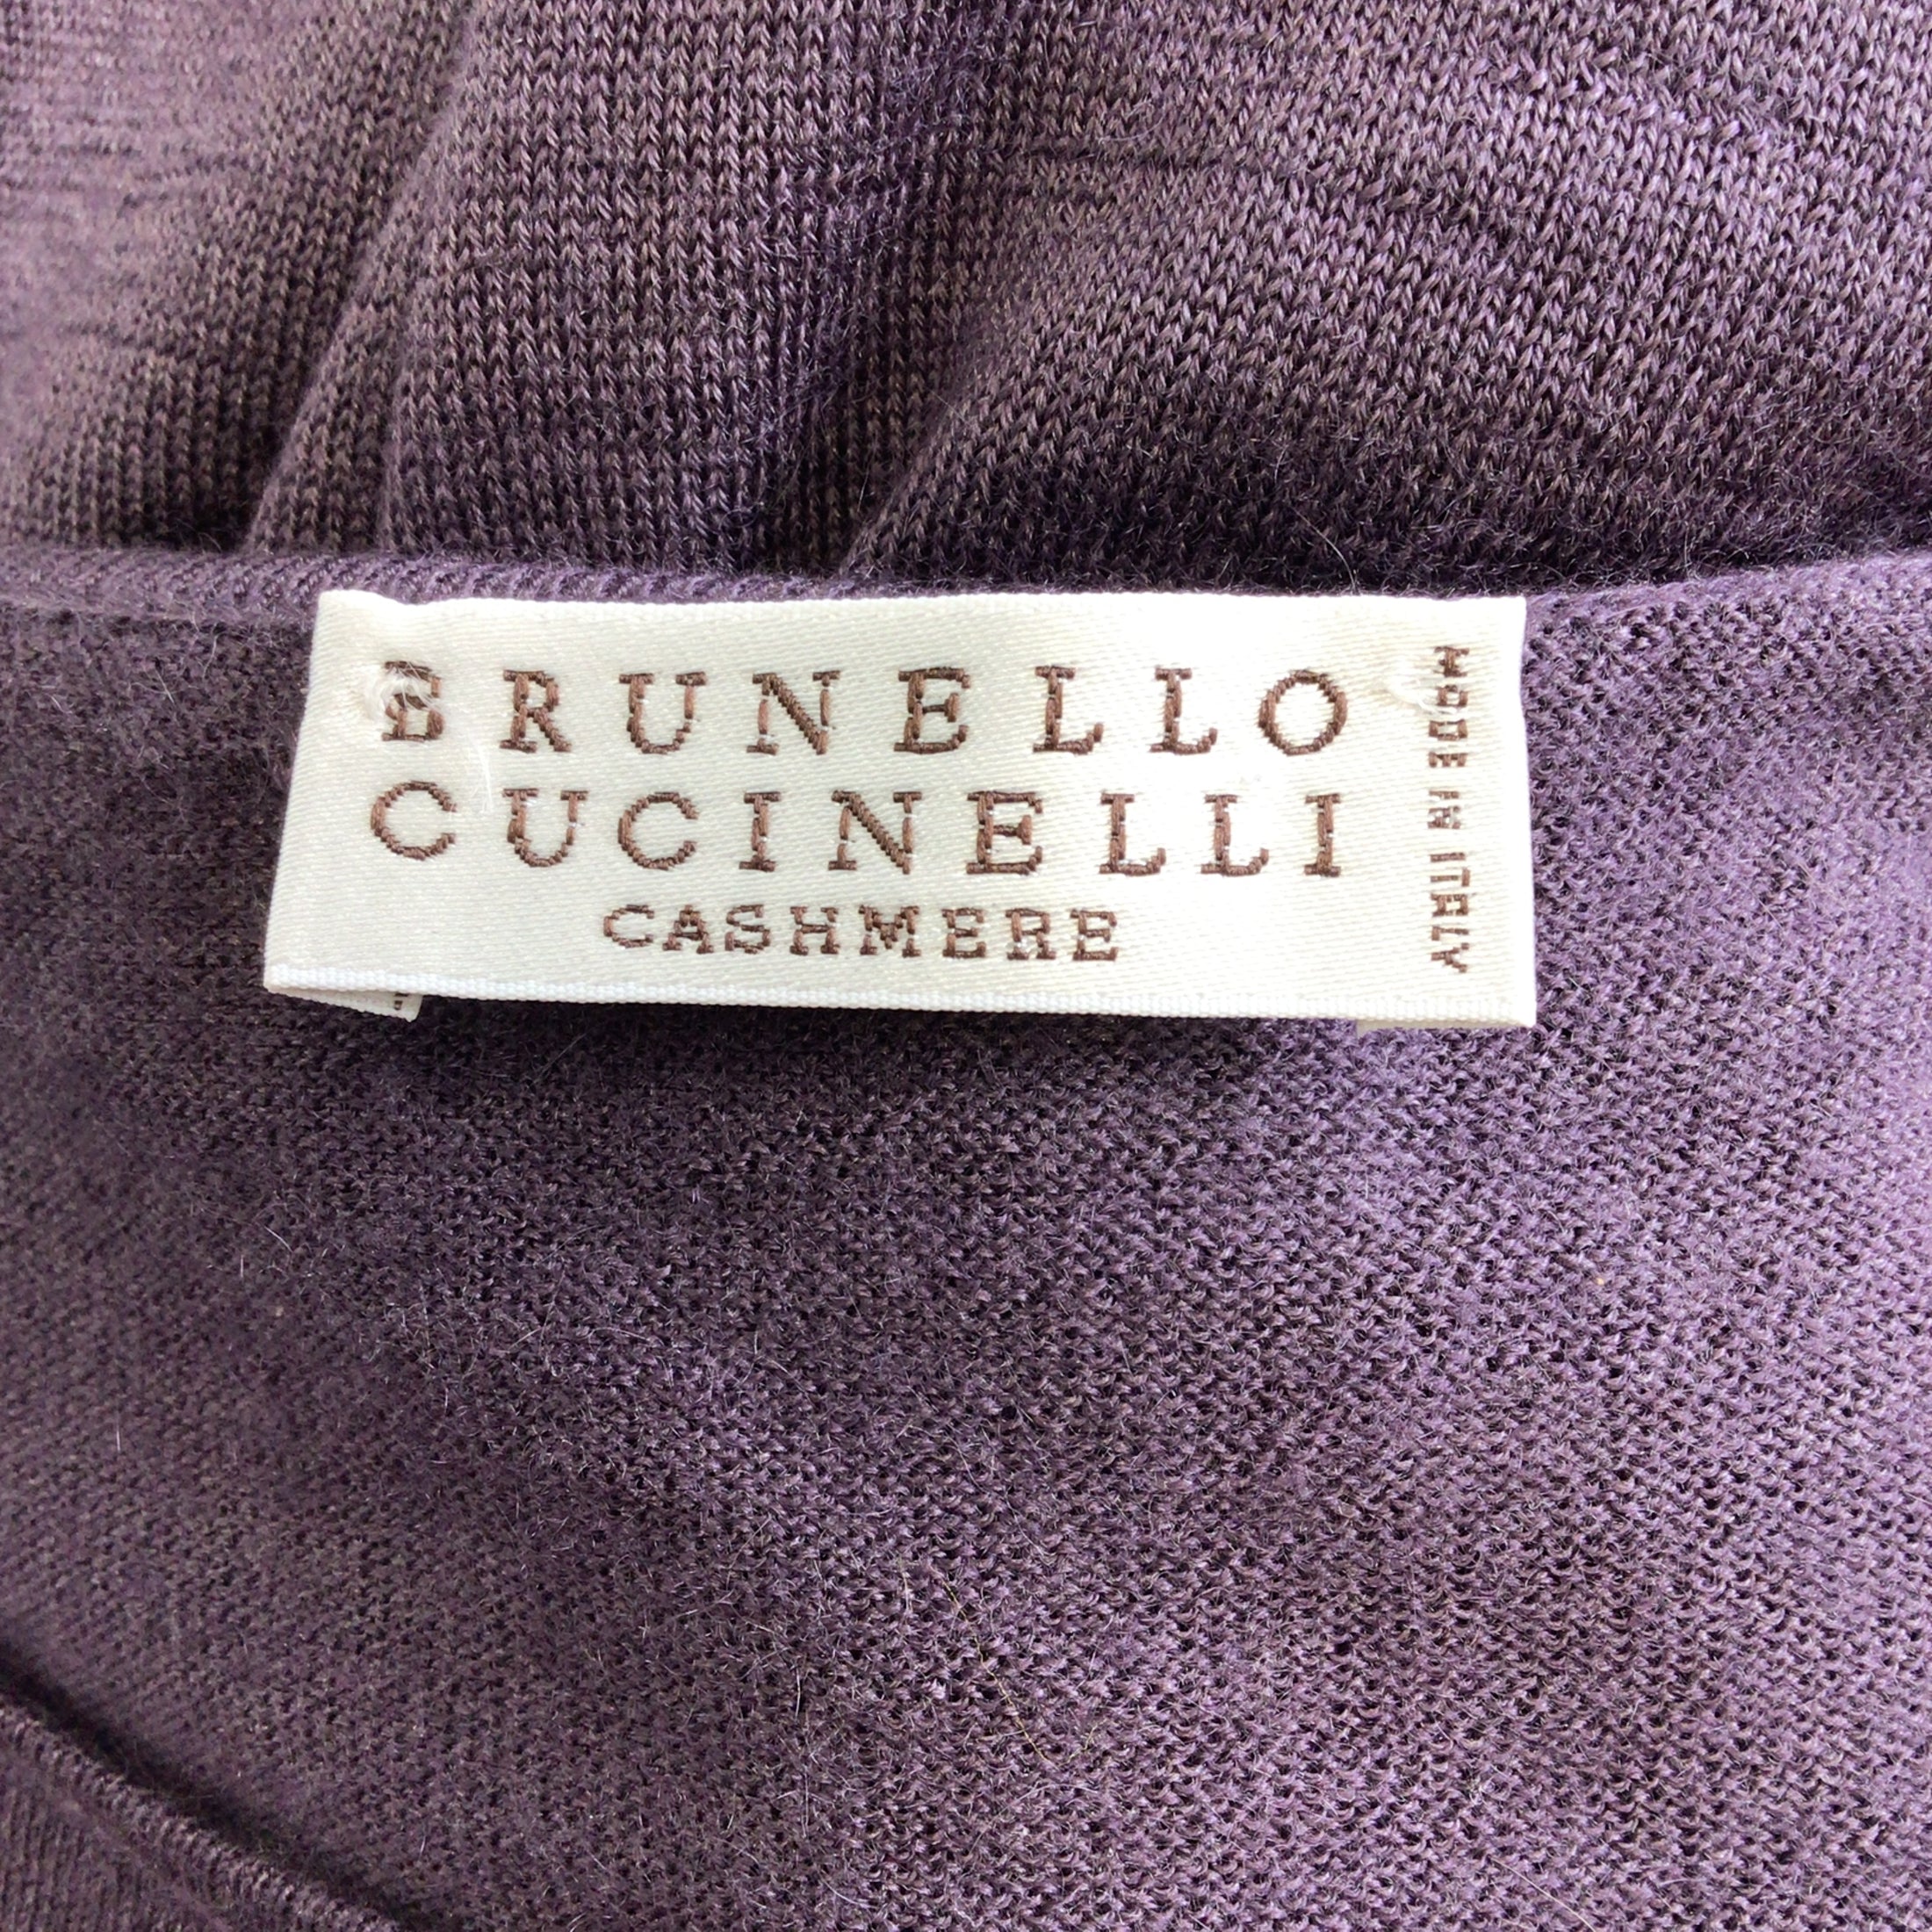 Brunello Cucinelli Purple Long Sleeved Cashmere and Silk Knit Sweater